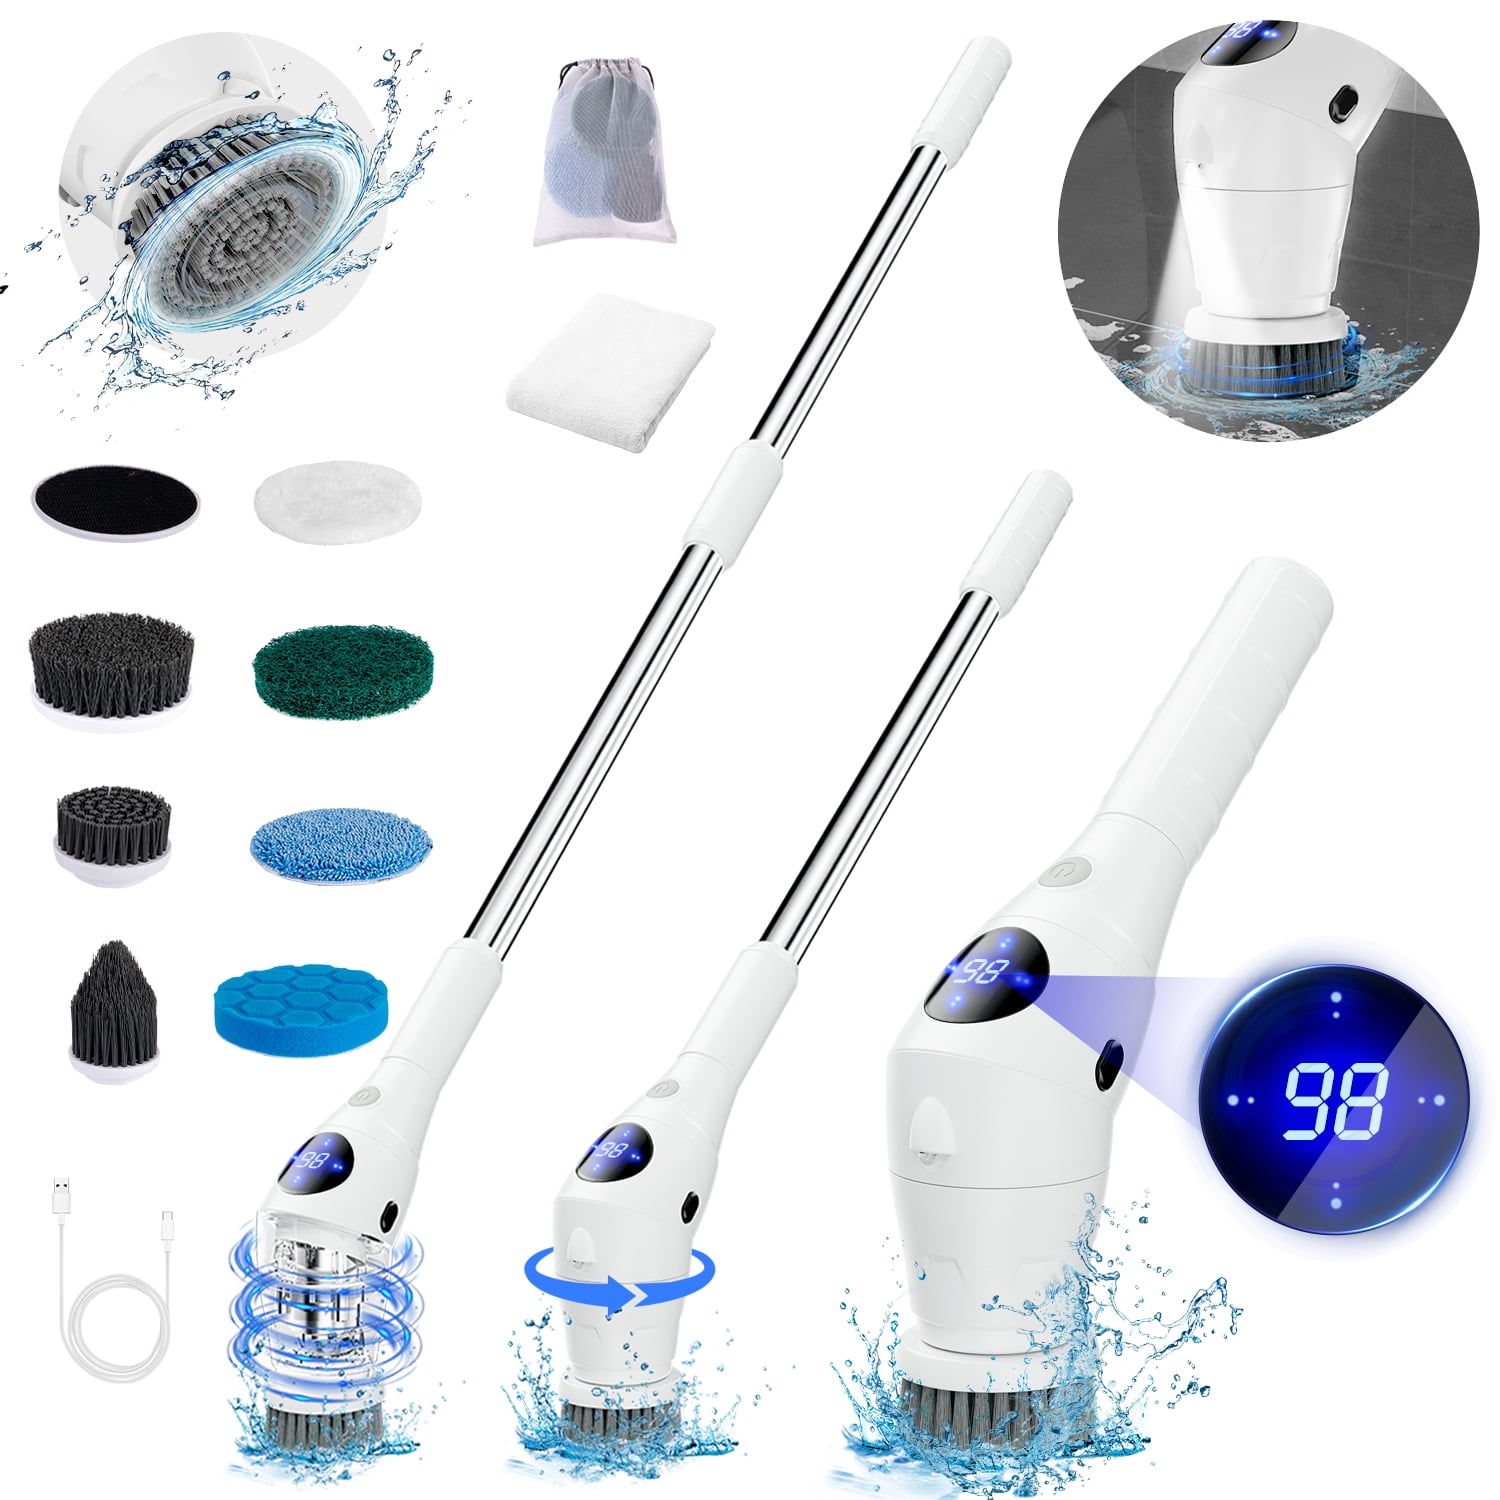 Buy VMITRA Multi-Functional Electric Cleaning Brush 5 in 1 Magic Power  Scrubber Household Cleaning Tools Spin Scrubber with 3 Brush Heads, Buffer  Polisher, for Bathroom, Shower, Tub, Kitchen Floor Online at Best